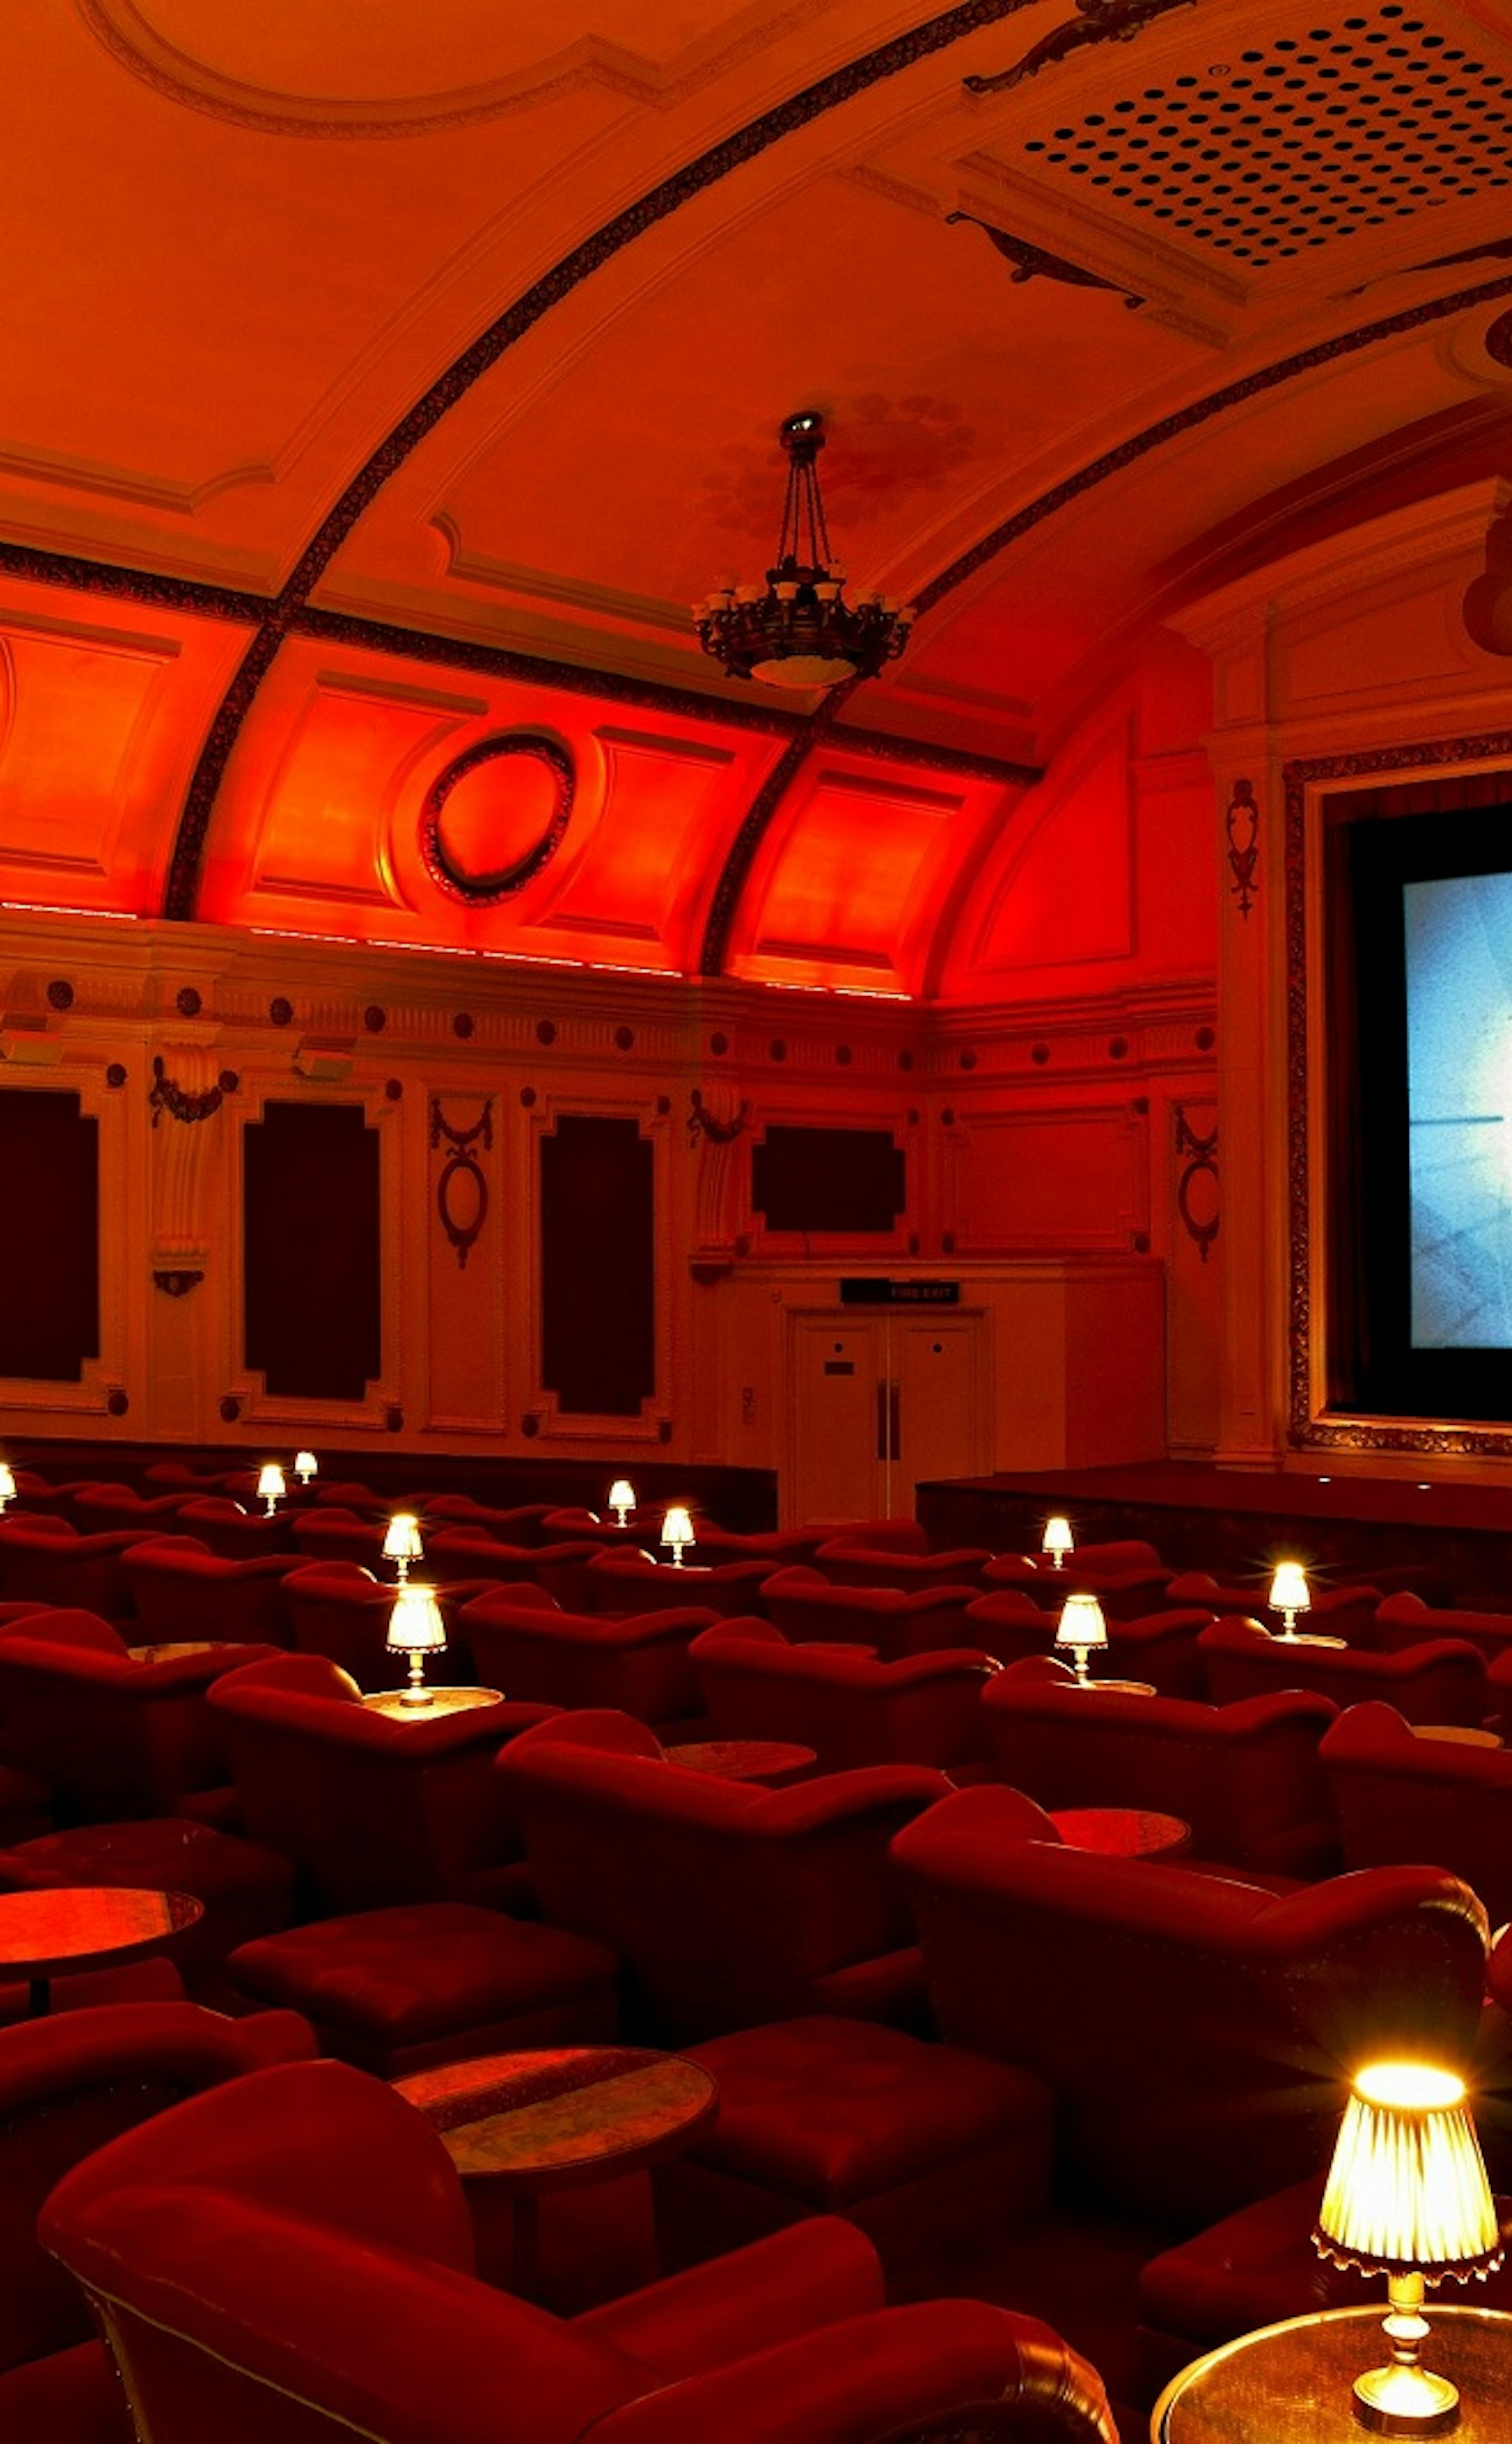 Private Screening Rooms - The Electric Cinema